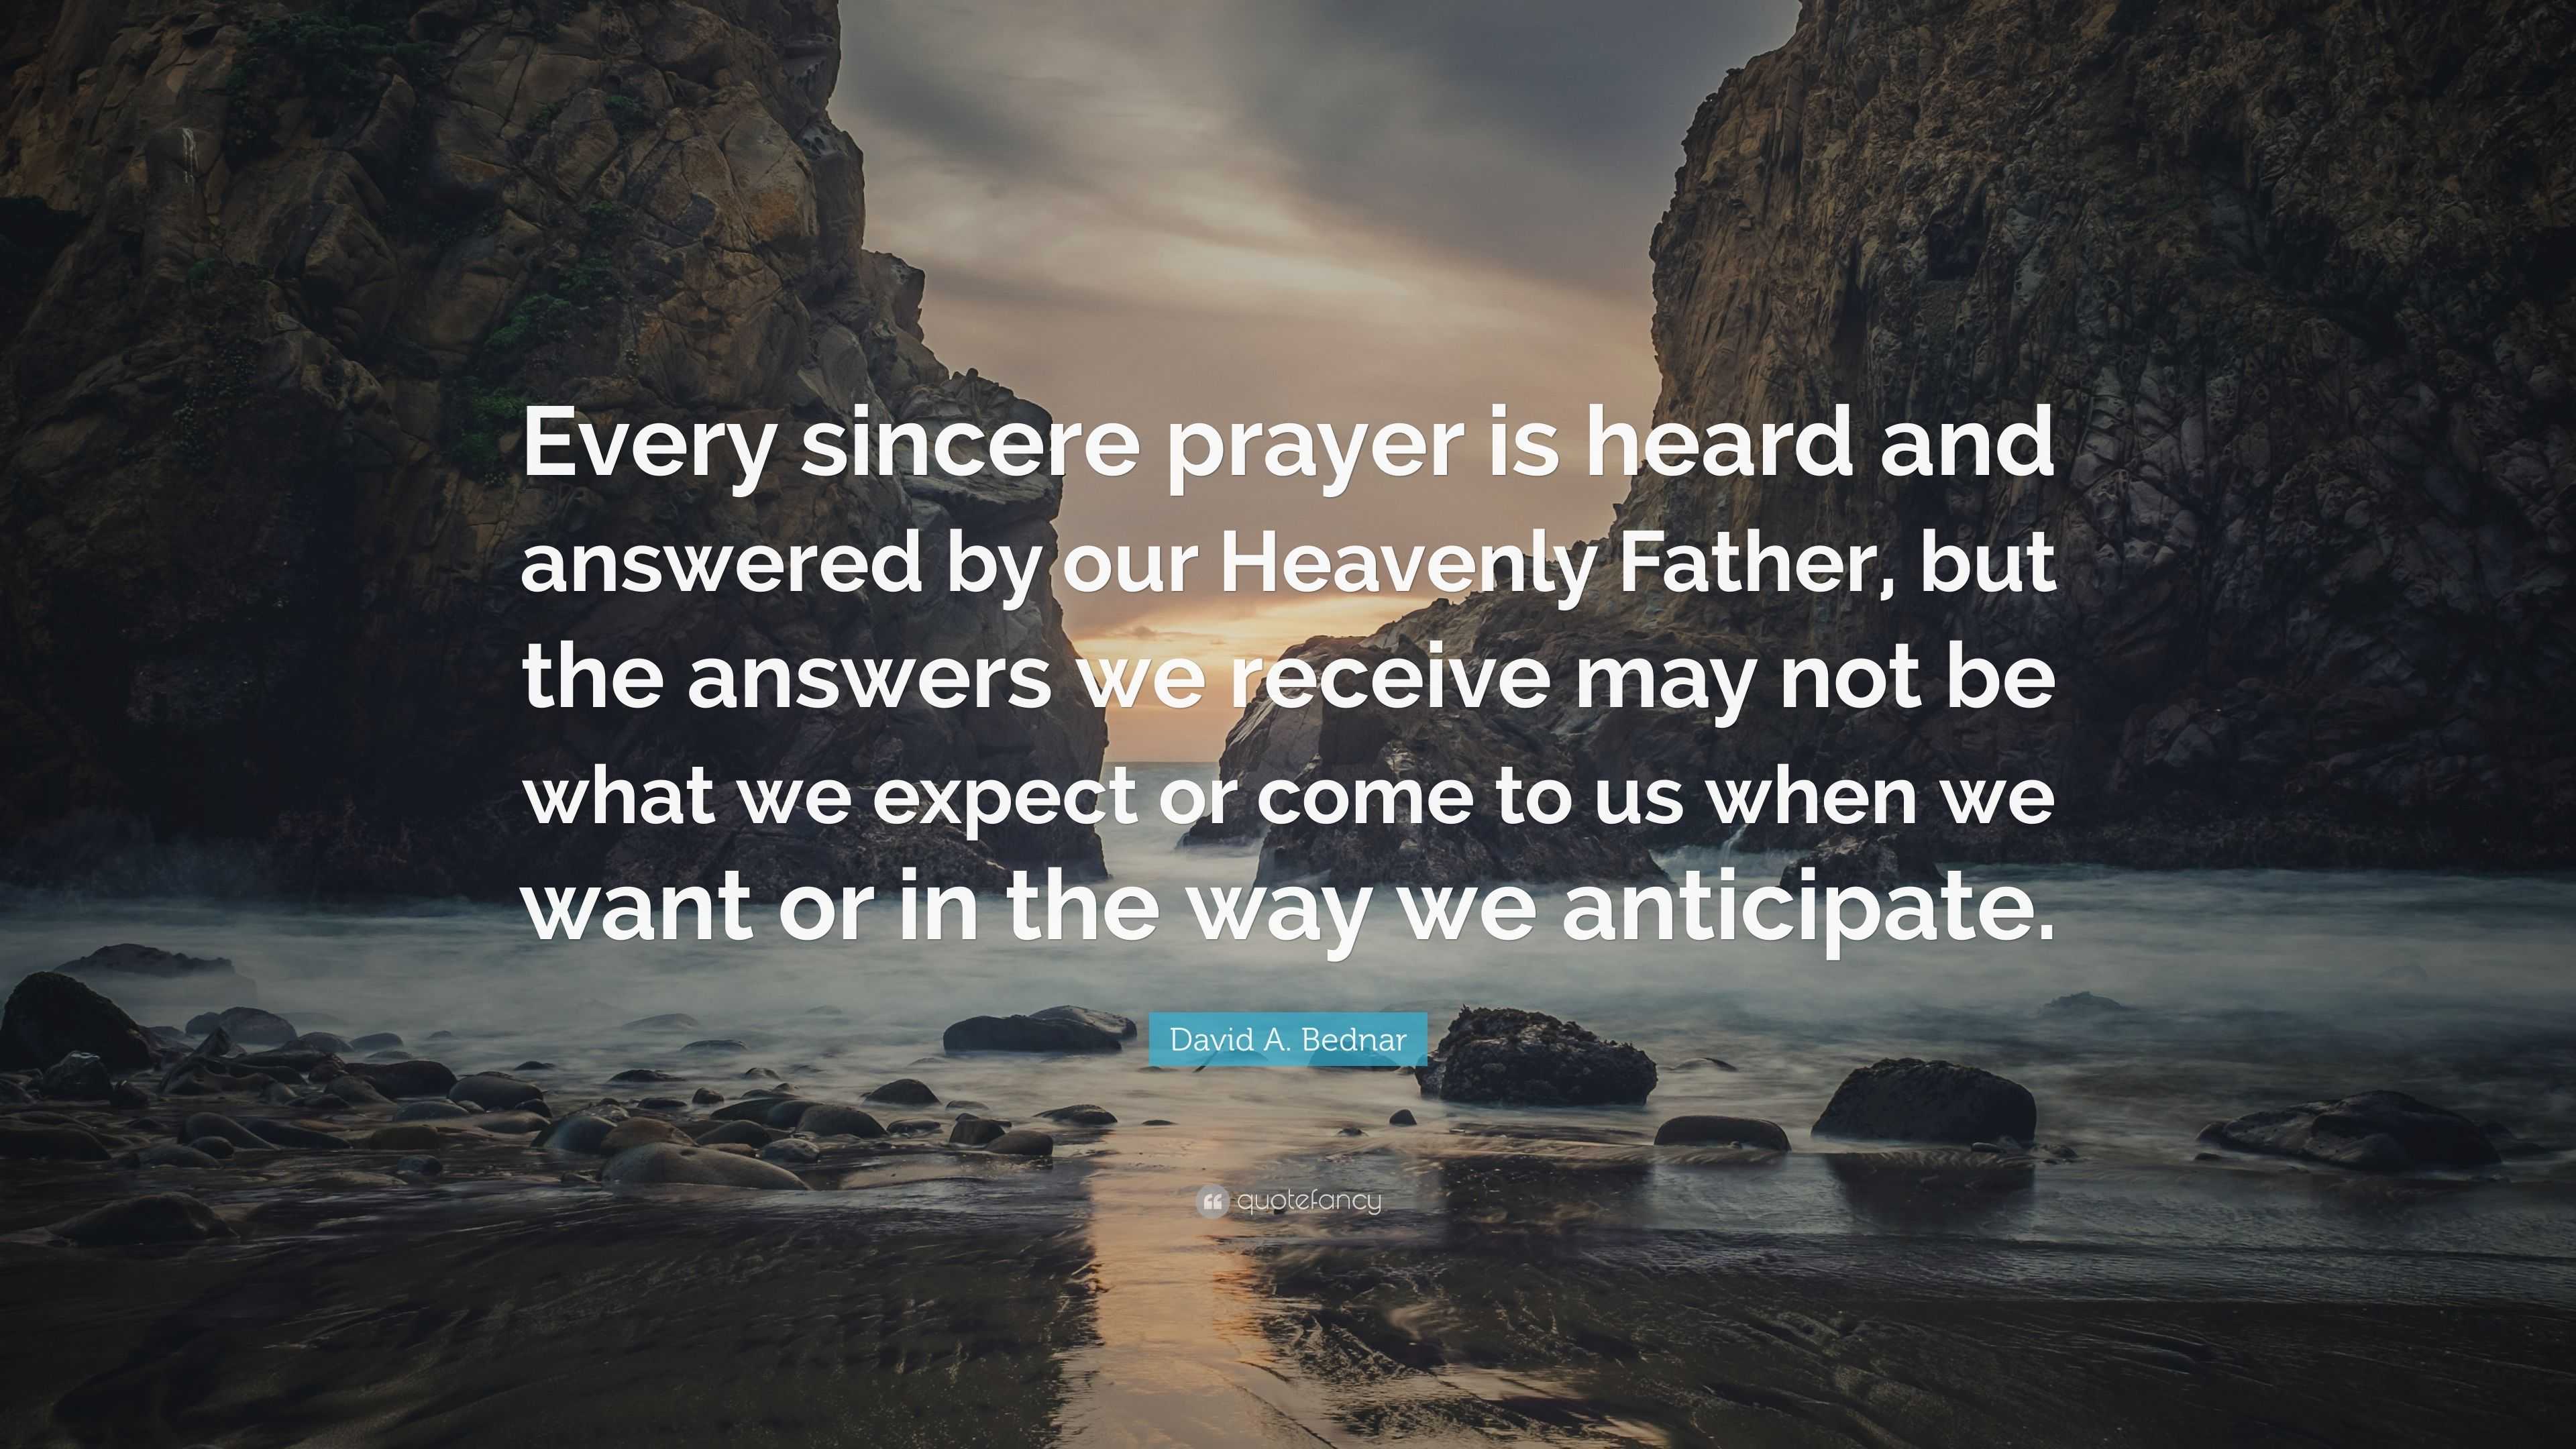 David A. Bednar Quote: “Every sincere prayer is heard and answered by ...